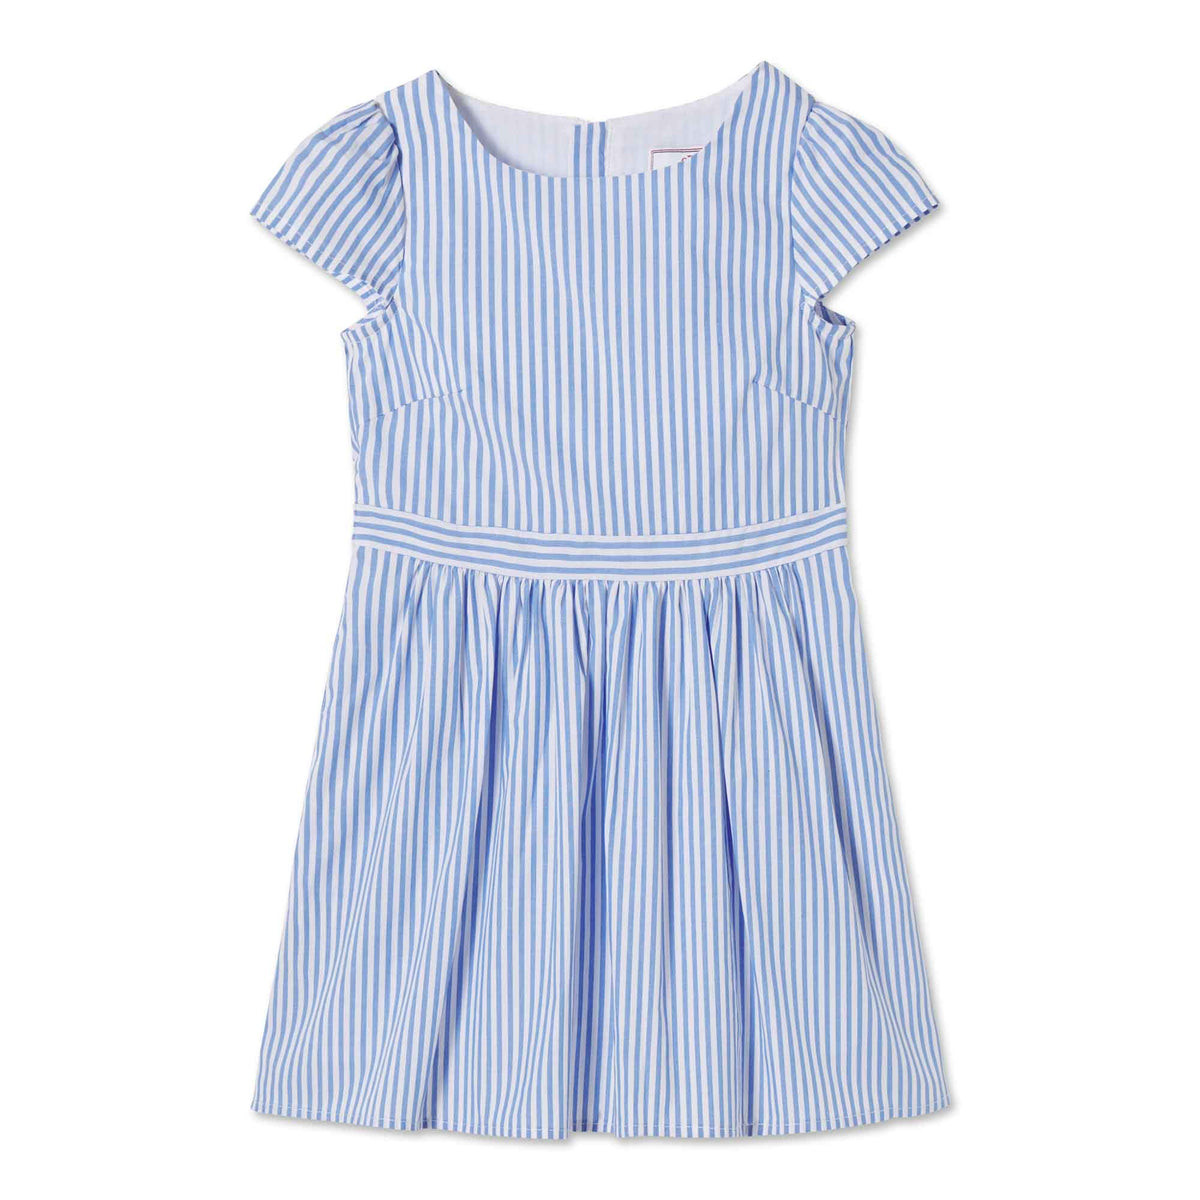 Classic and Preppy Tilly Cap Sleeve Dress, Barkley Stripe-Dresses, Jumpsuits and Rompers-Barkley Stripe-5Y-CPC - Classic Prep Childrenswear